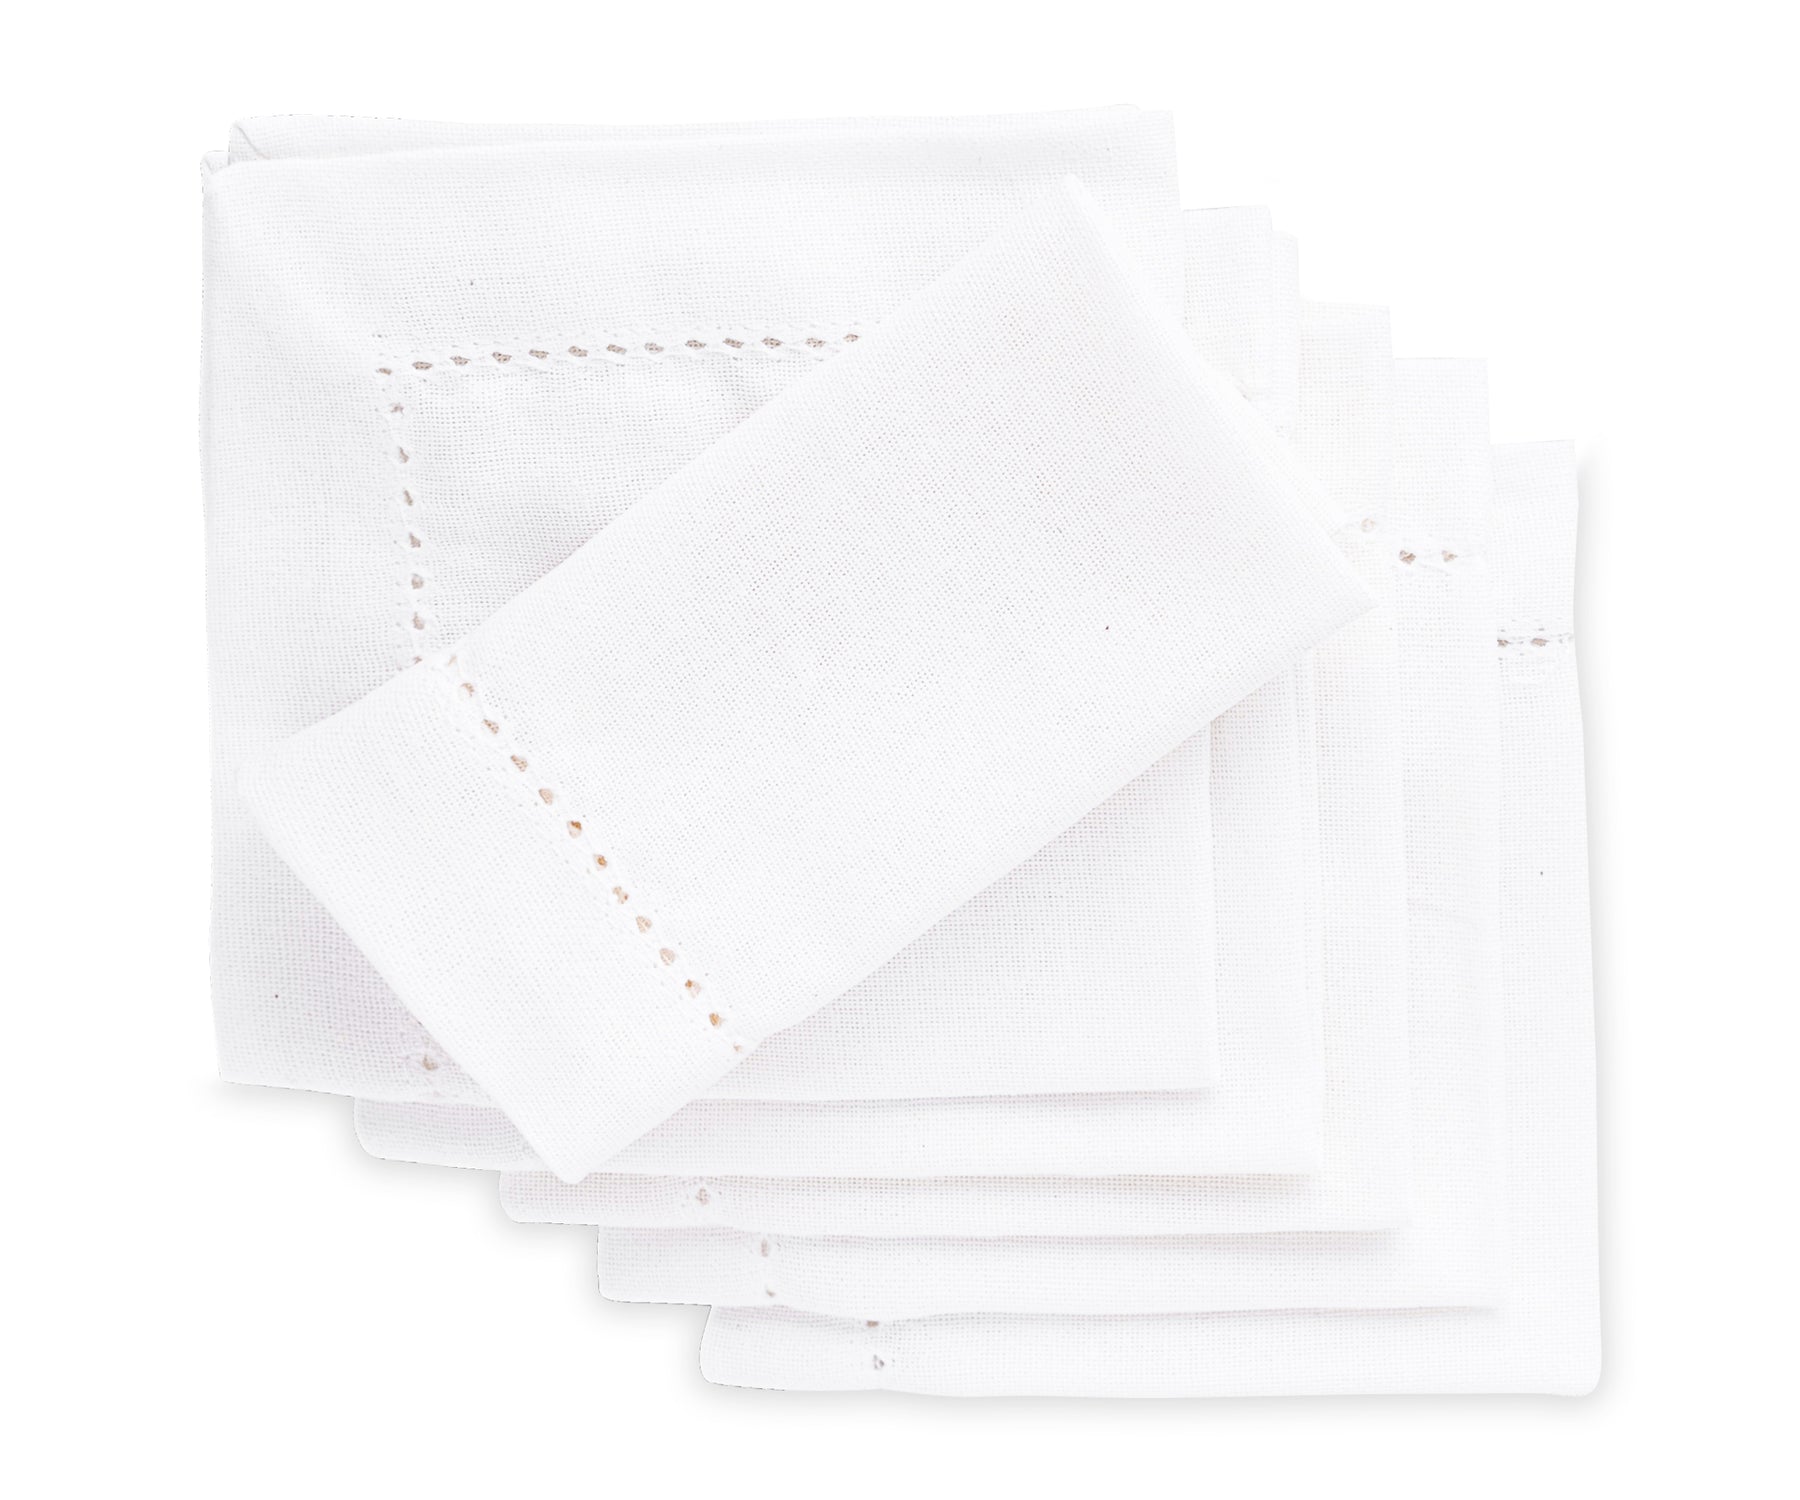 Introduce warmth with Luxury Dinner Napkins.